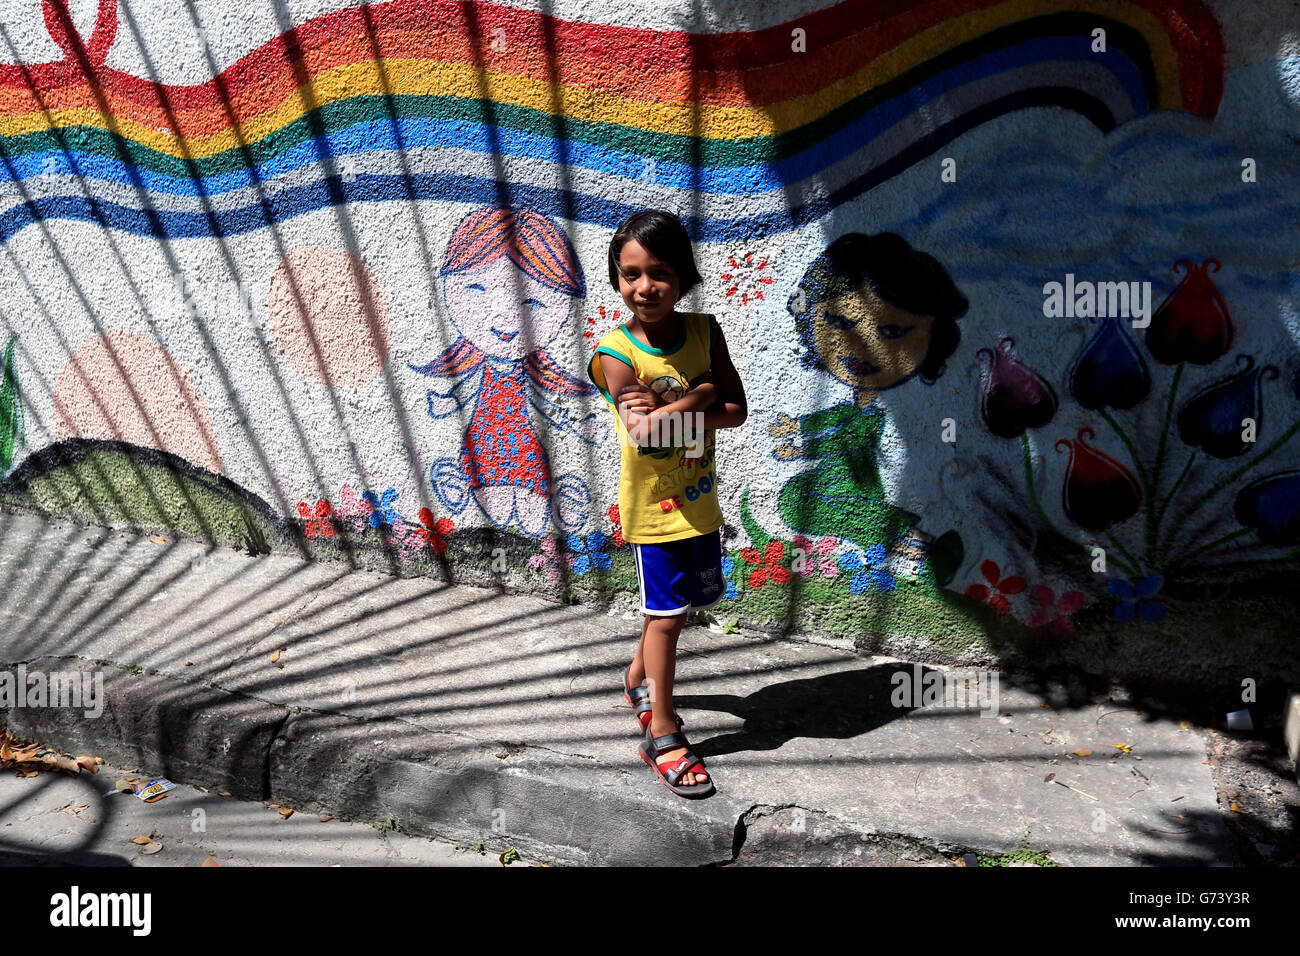 Soccer - FIFA World Cup 2014 - Group D - England v Italy - Arena da Amazonia. A local boy plays football in the street ahead of this evenings match at the Arena da Amazonia, Manaus, Brazil. Stock Photo